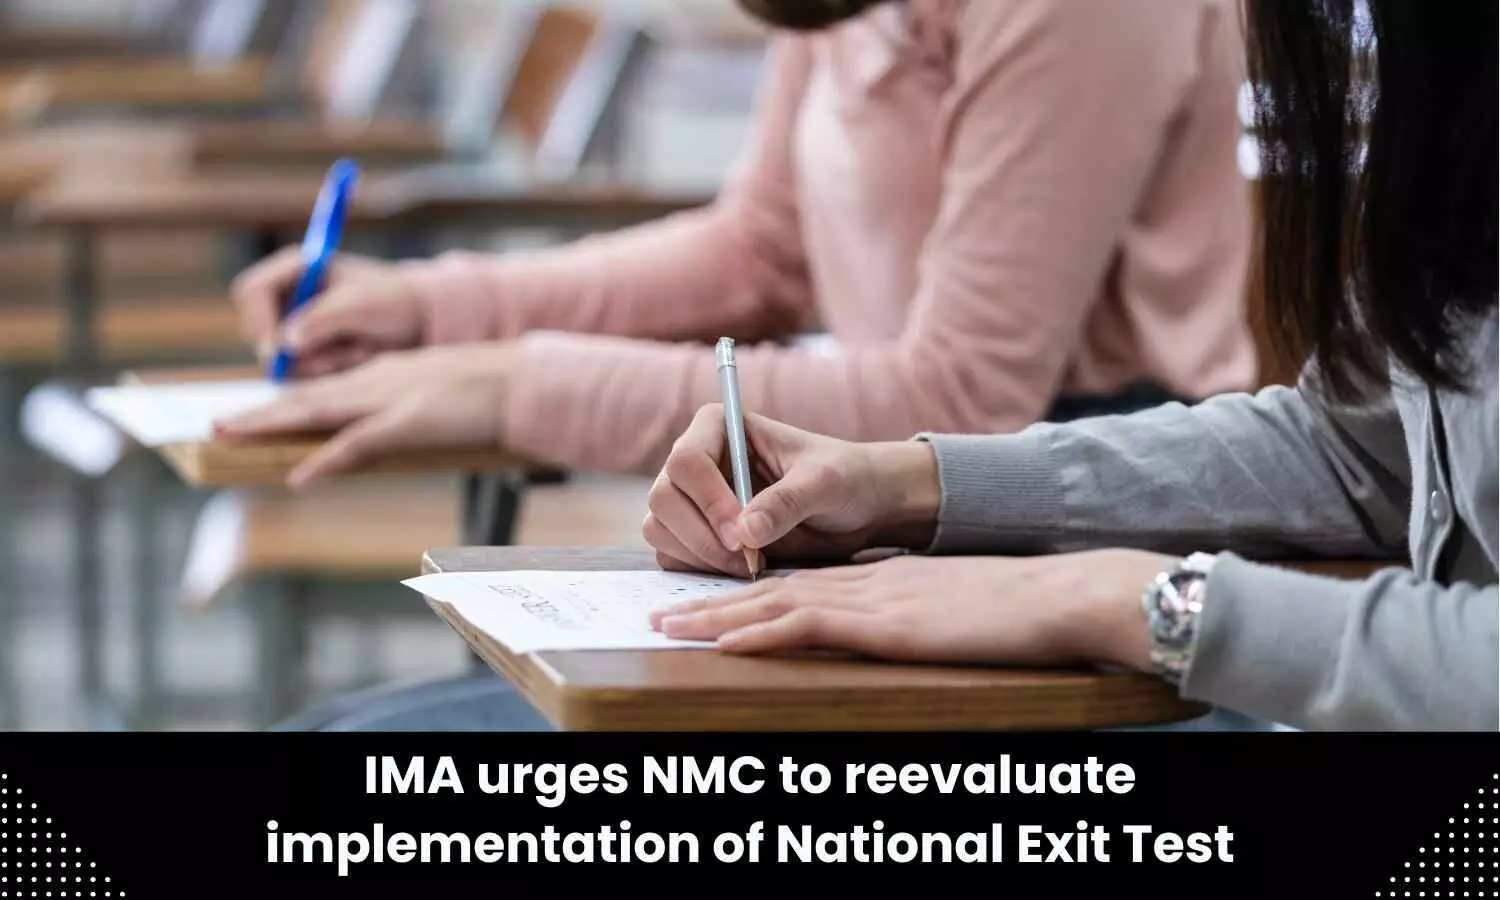 IMA asks NMC to reconsider implementation of NExT